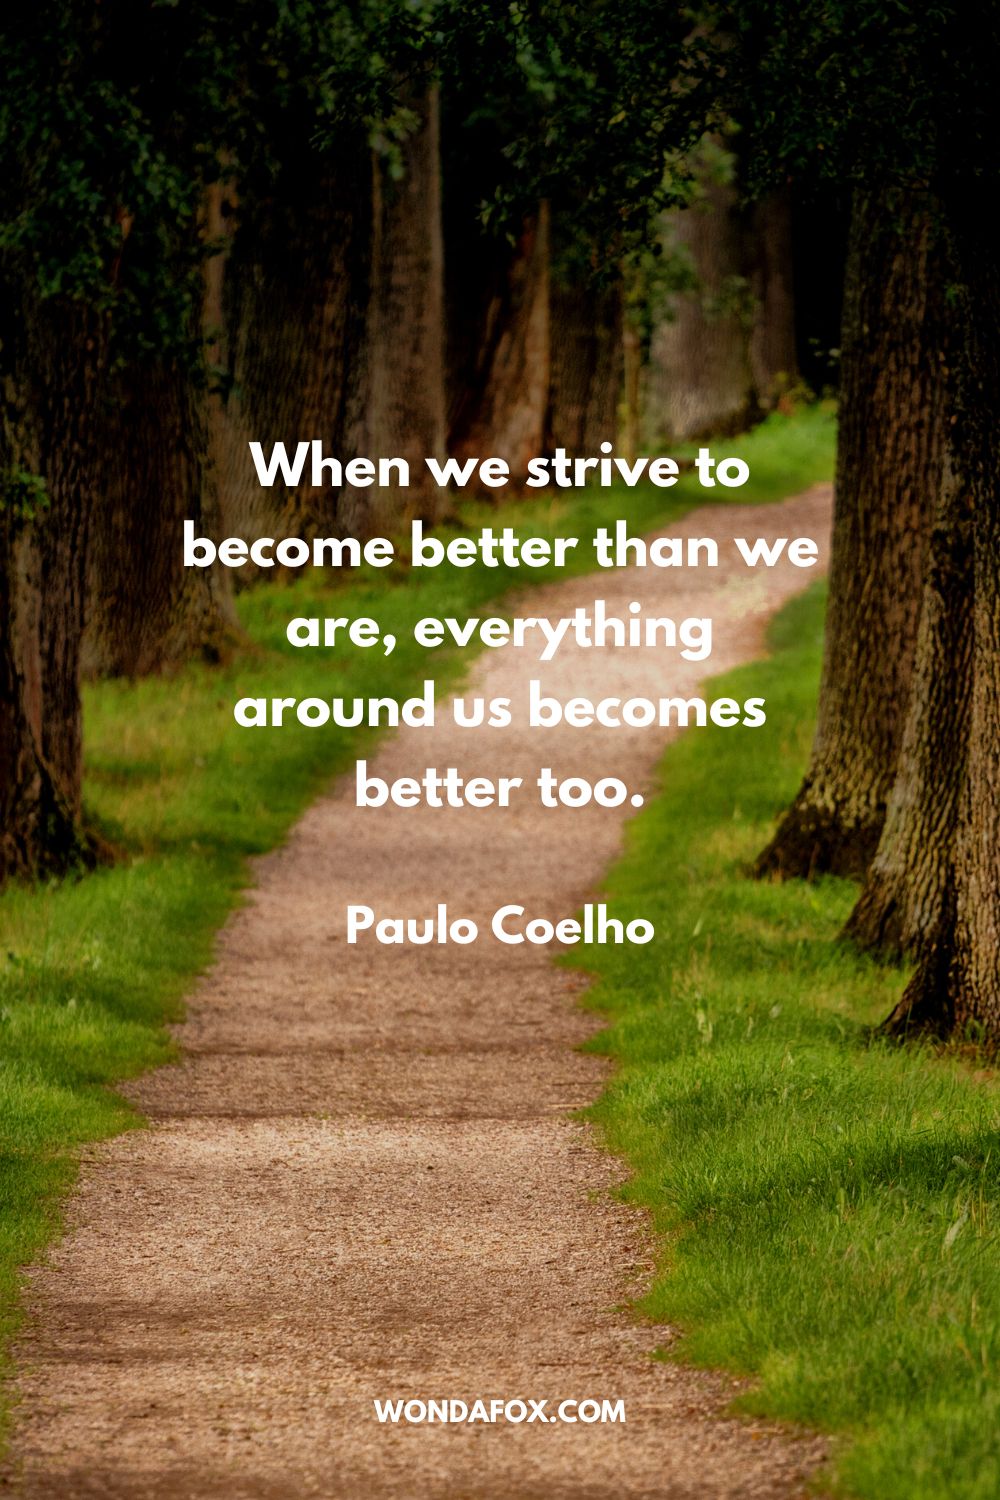 When we strive to become better than we are, everything around us becomes better too. Paulo Coelho